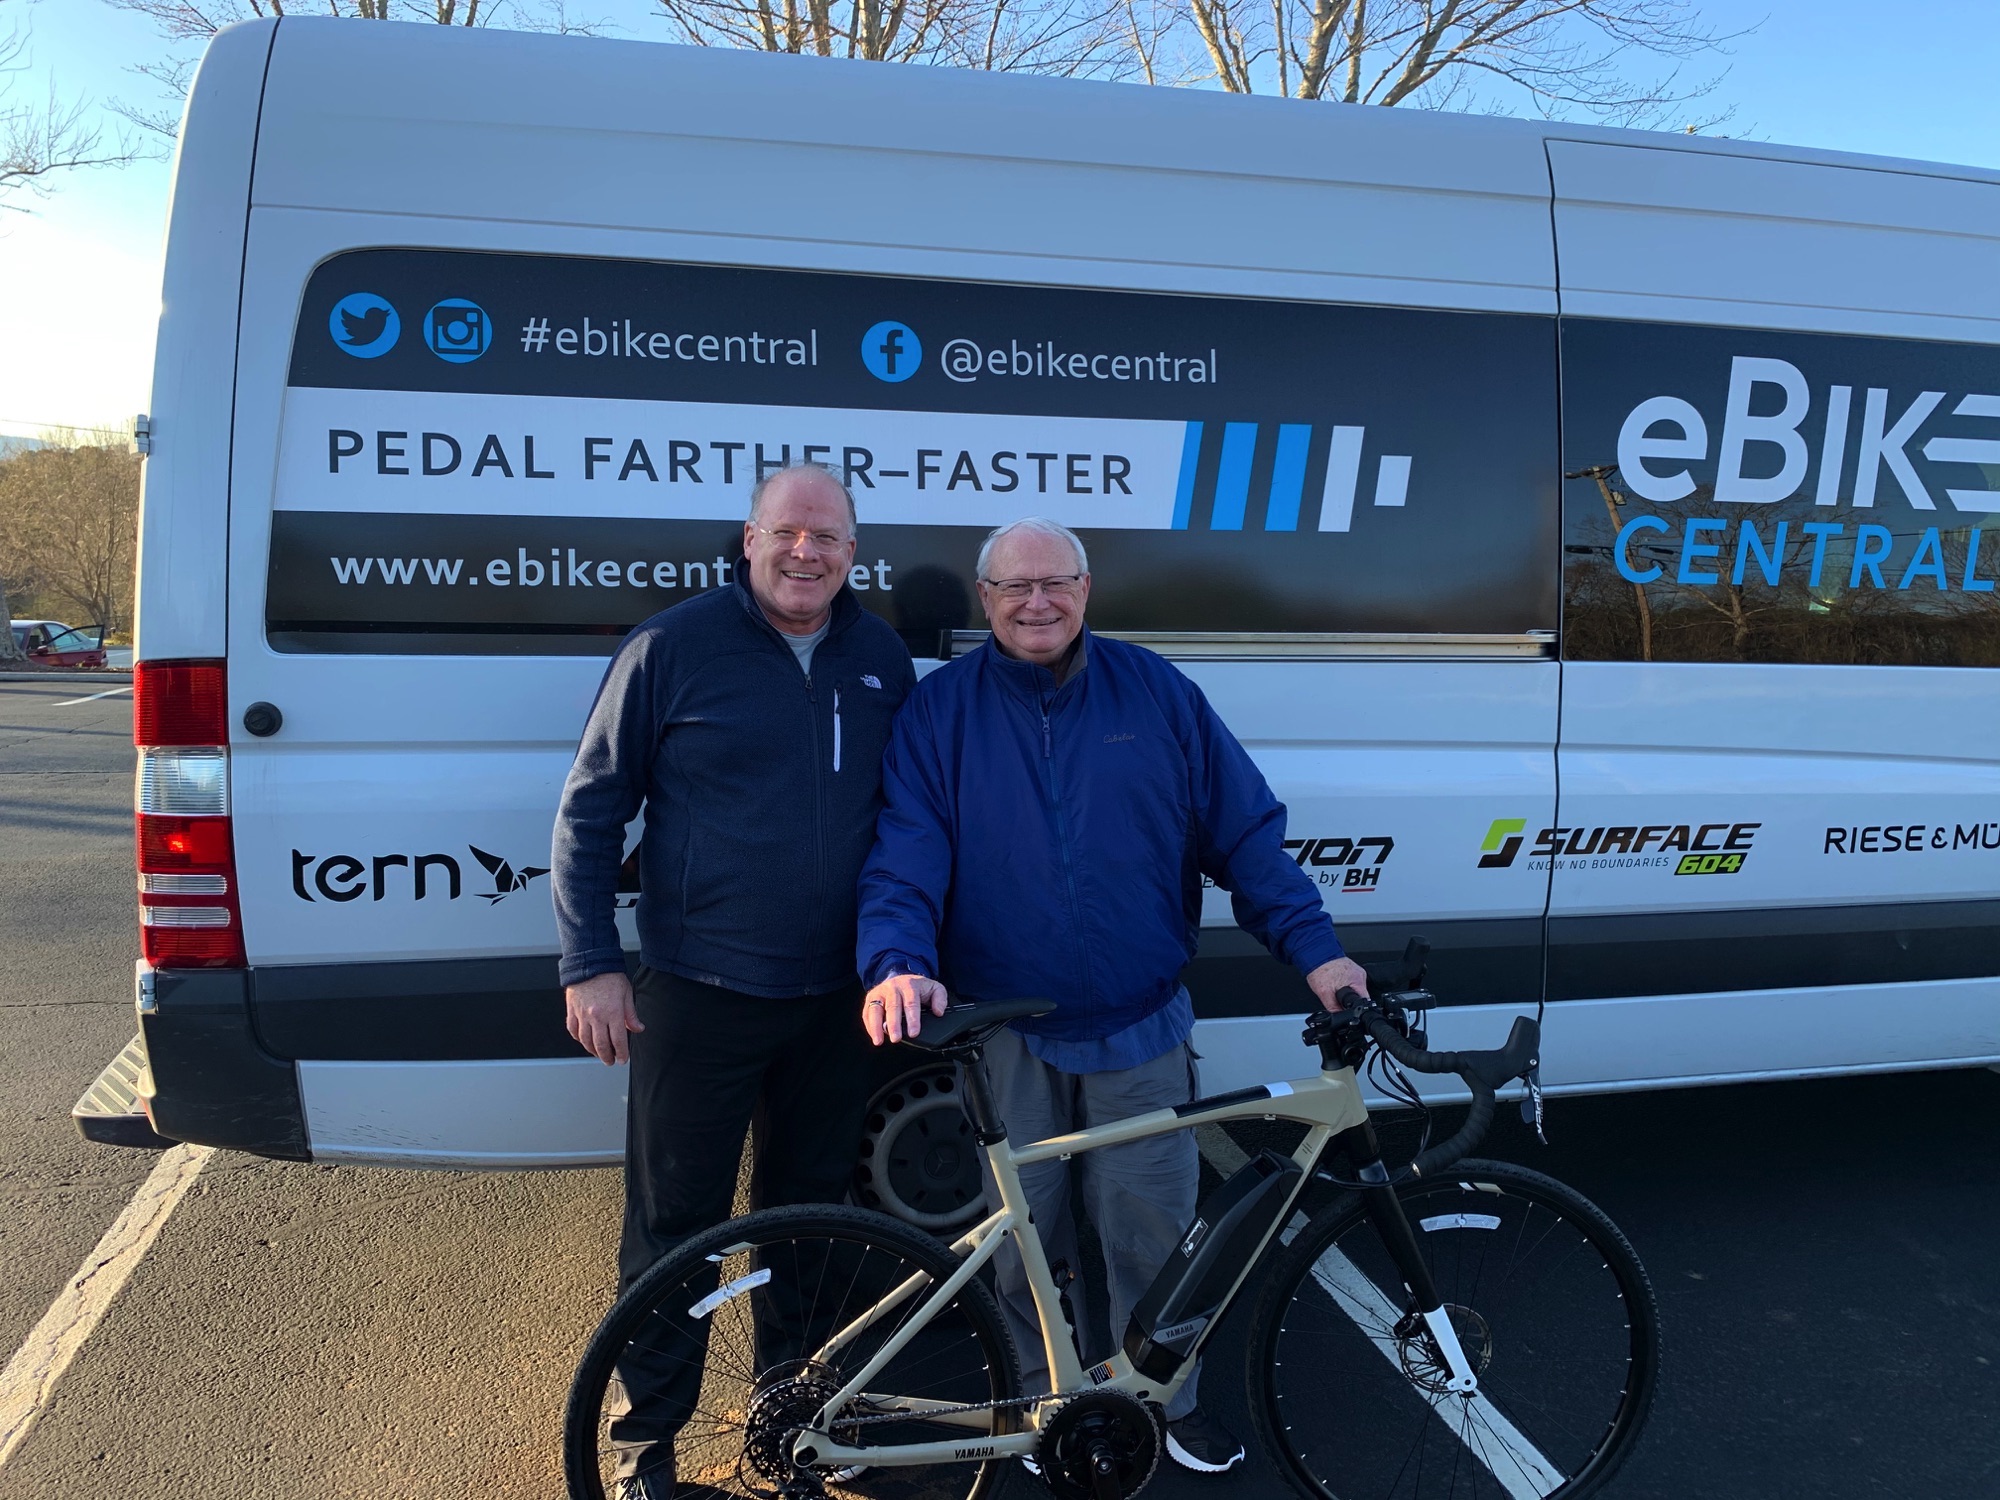 eBike Central's Joe Michel poses with Martin after delivery